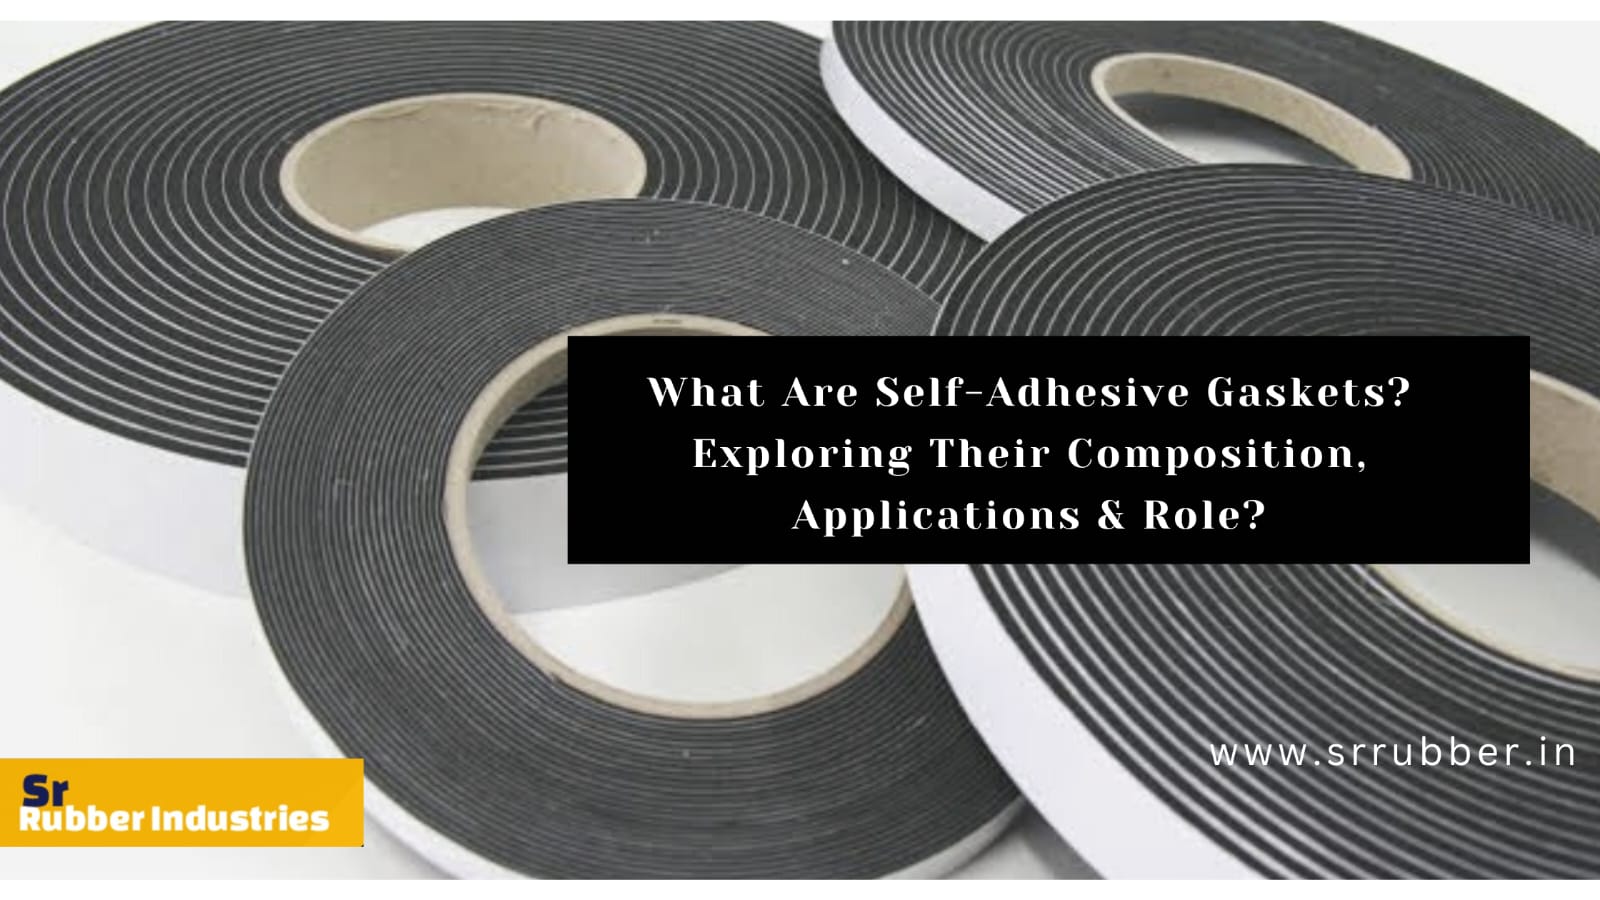 What Are Self-Adhesive Gaskets? Exploring Their Composition, Applications & Role?